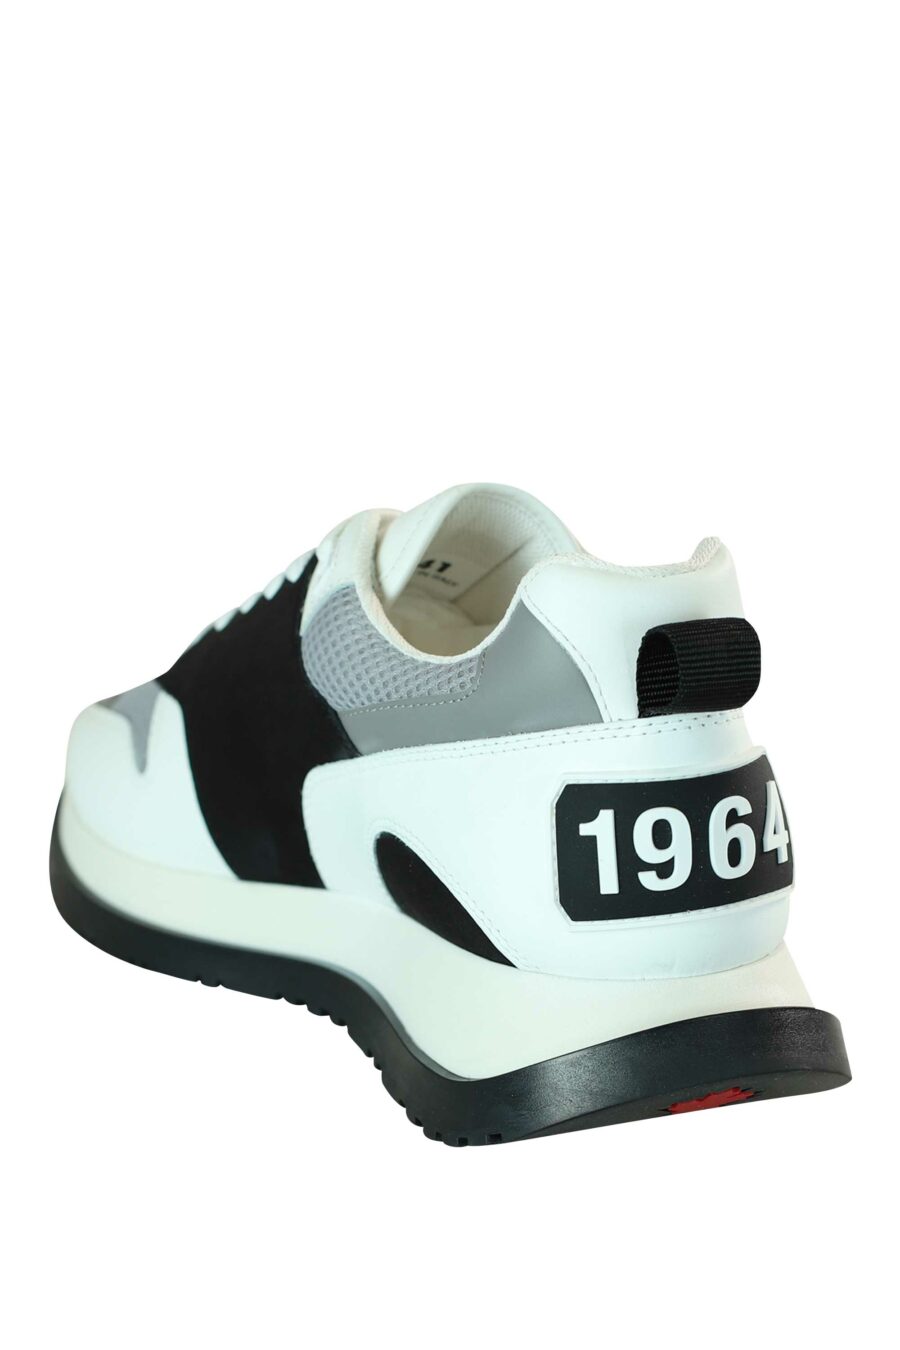 Black mix running shoes with logo on sole - 8055777205655 4